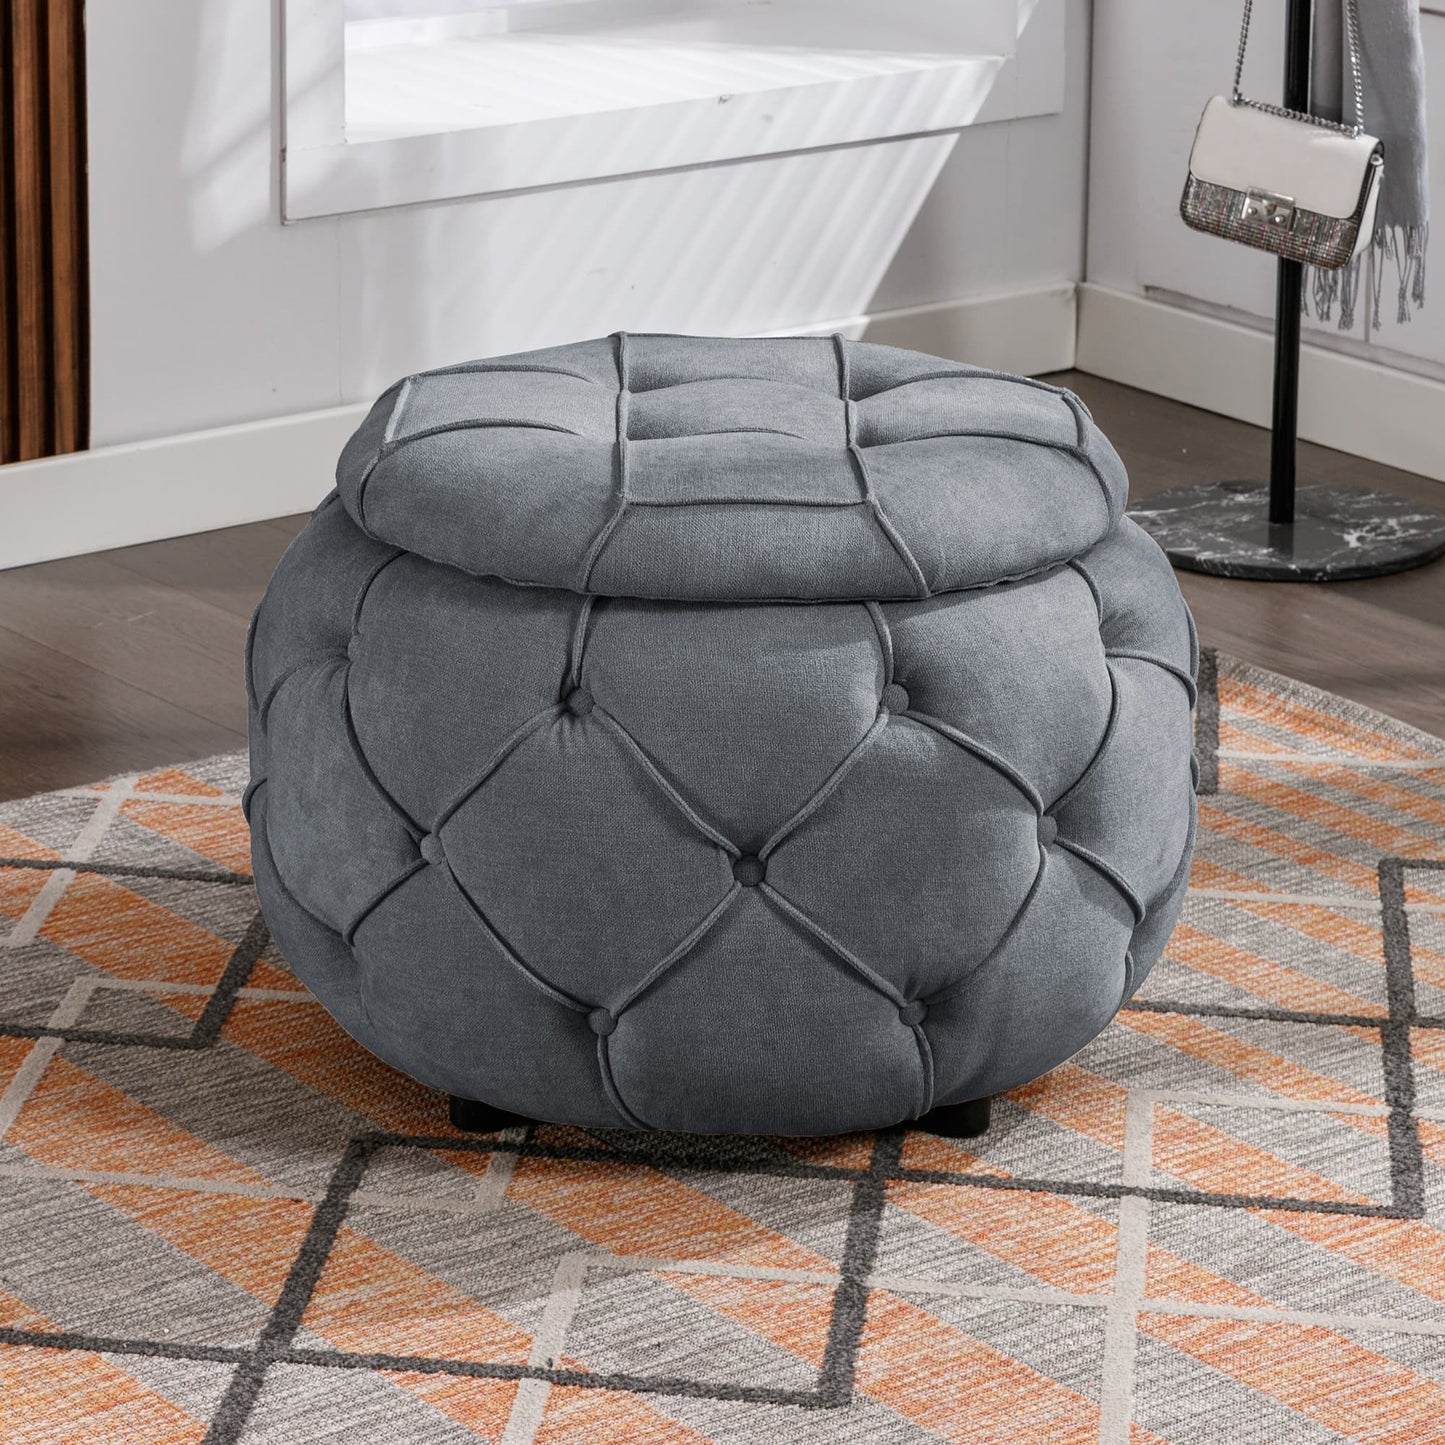 SogesPower Large Button Tufted Woven Round Storage Ottoman for Living Room & Bedroom,17.7"H Burlap Grey